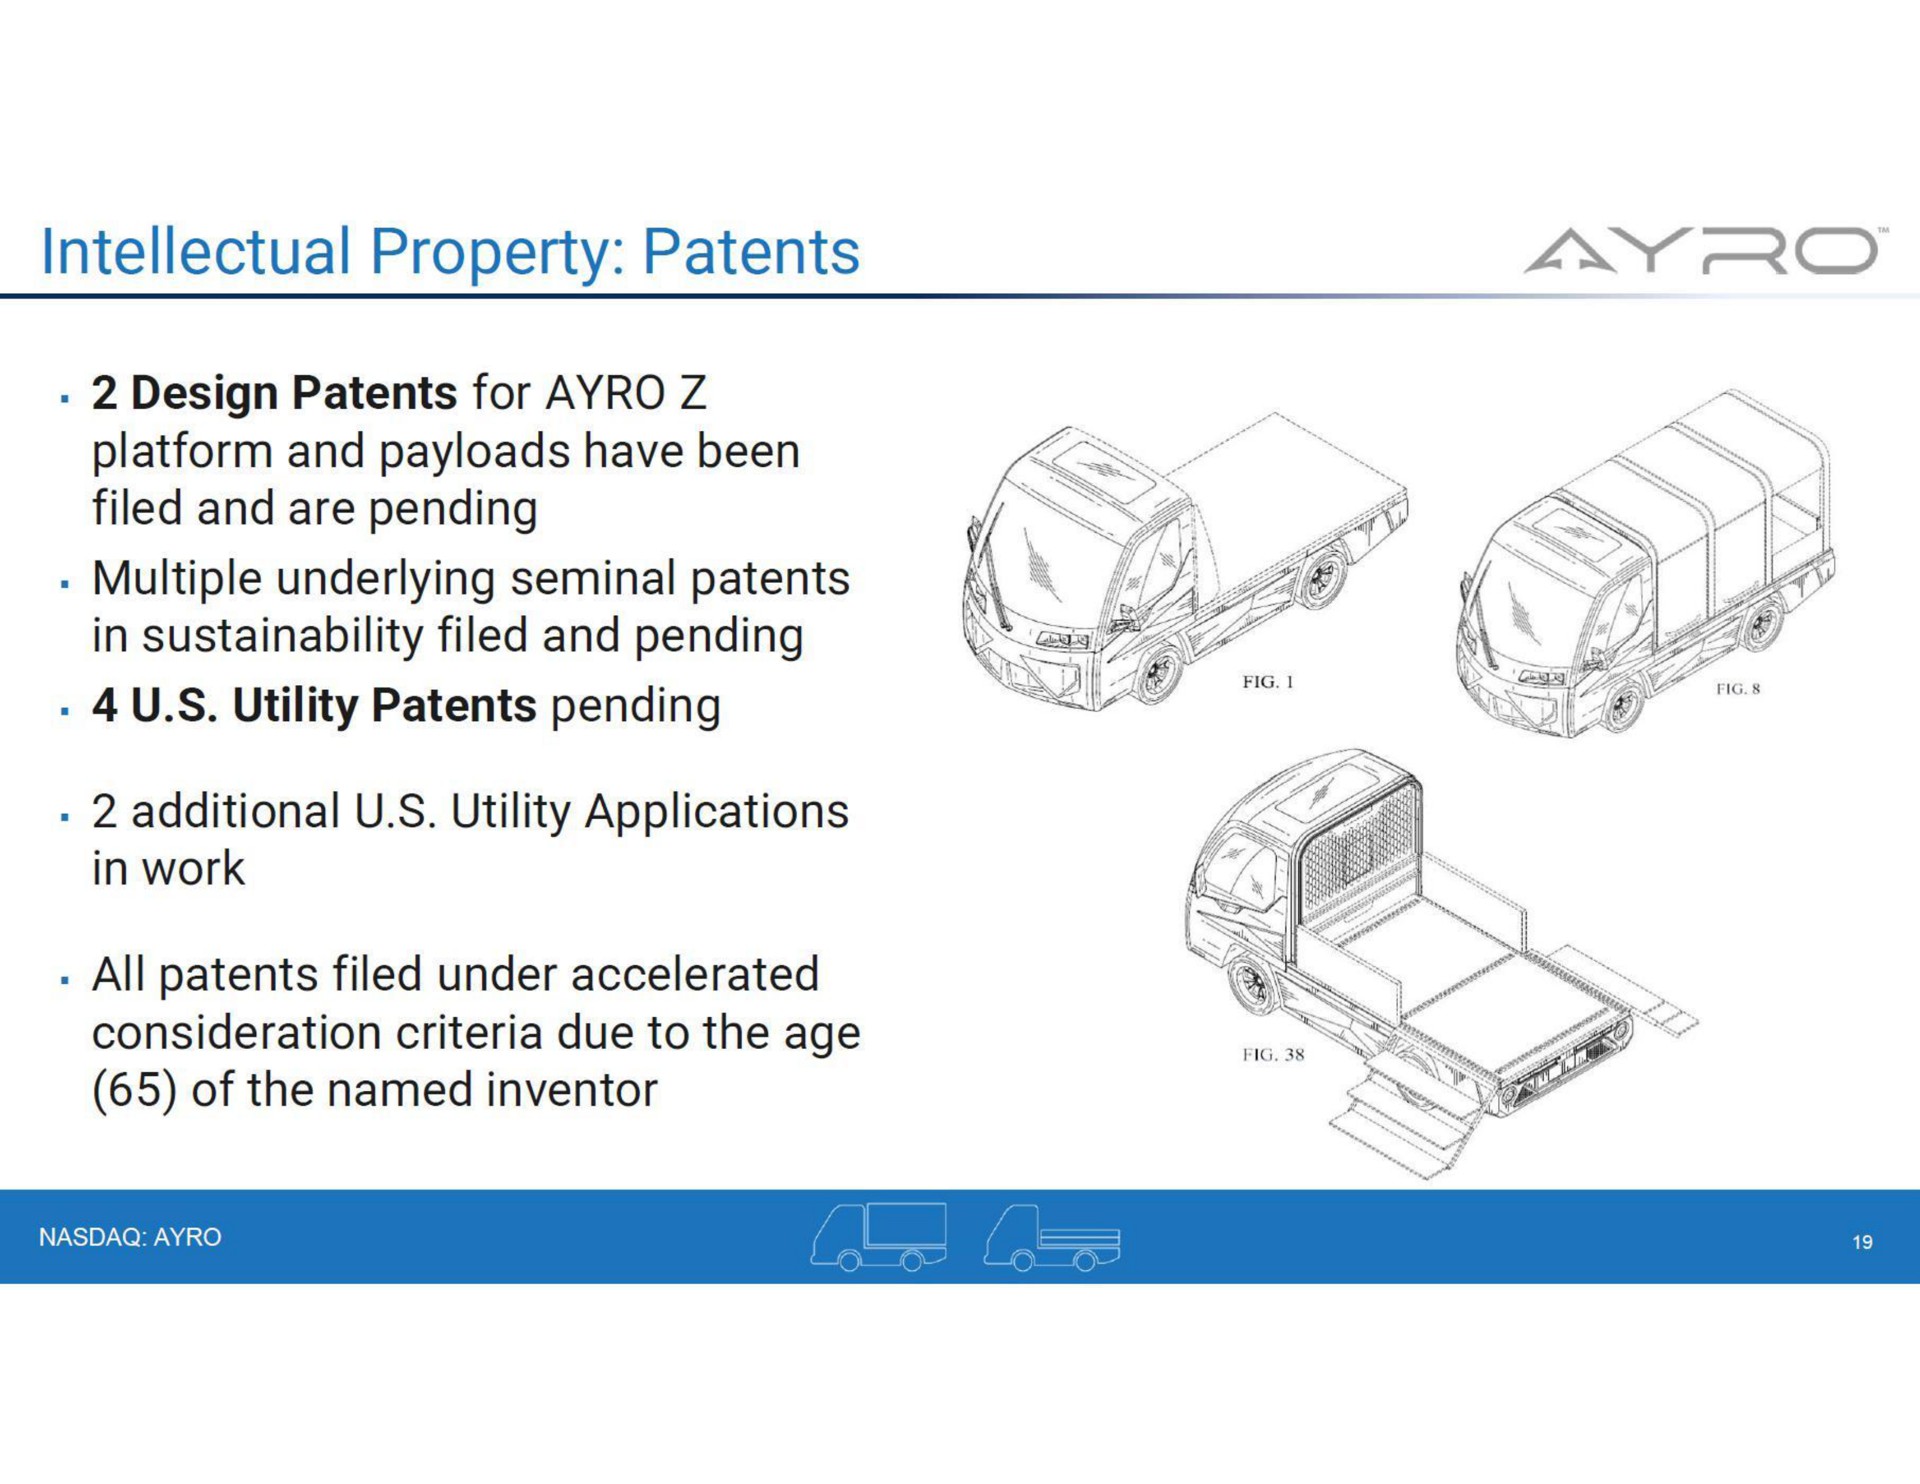 intellectual property patents rod of the named inventor | AYRO